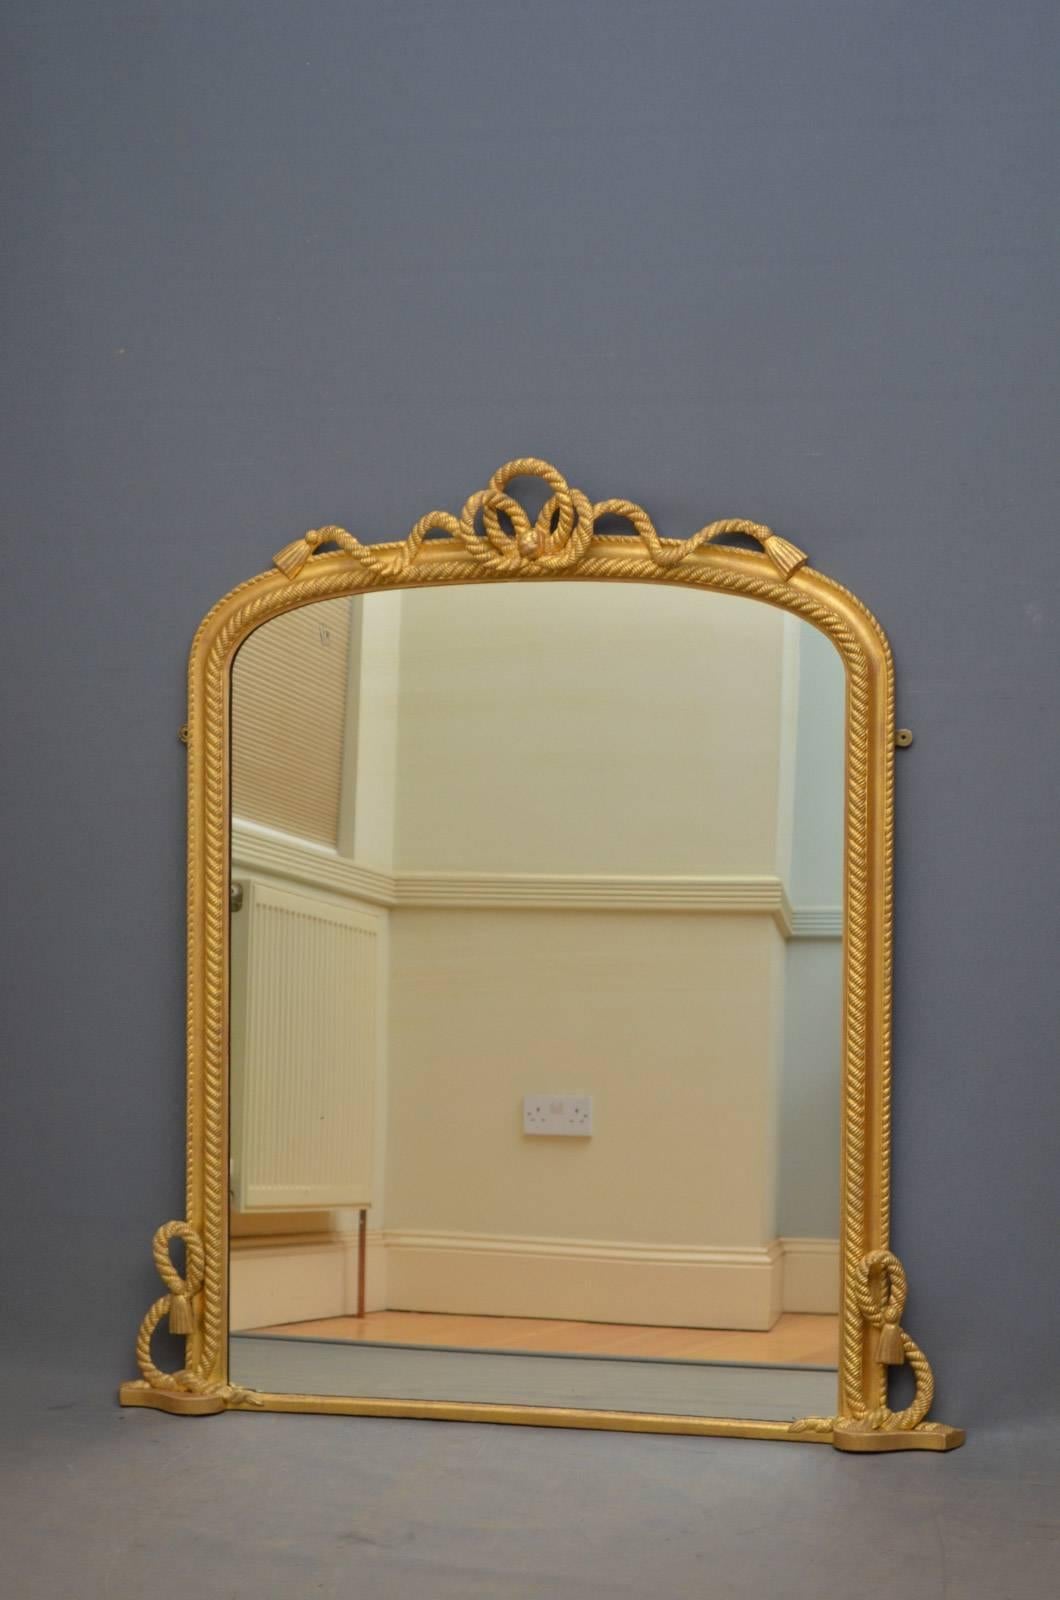 K0332 Victorian gilt overmantle mirror, having original mirror plate with some foxing in rope decorated frame. This antique mirror is in fantastic original condition throughout, ready to place at home. c1870
Measure: H 49.5